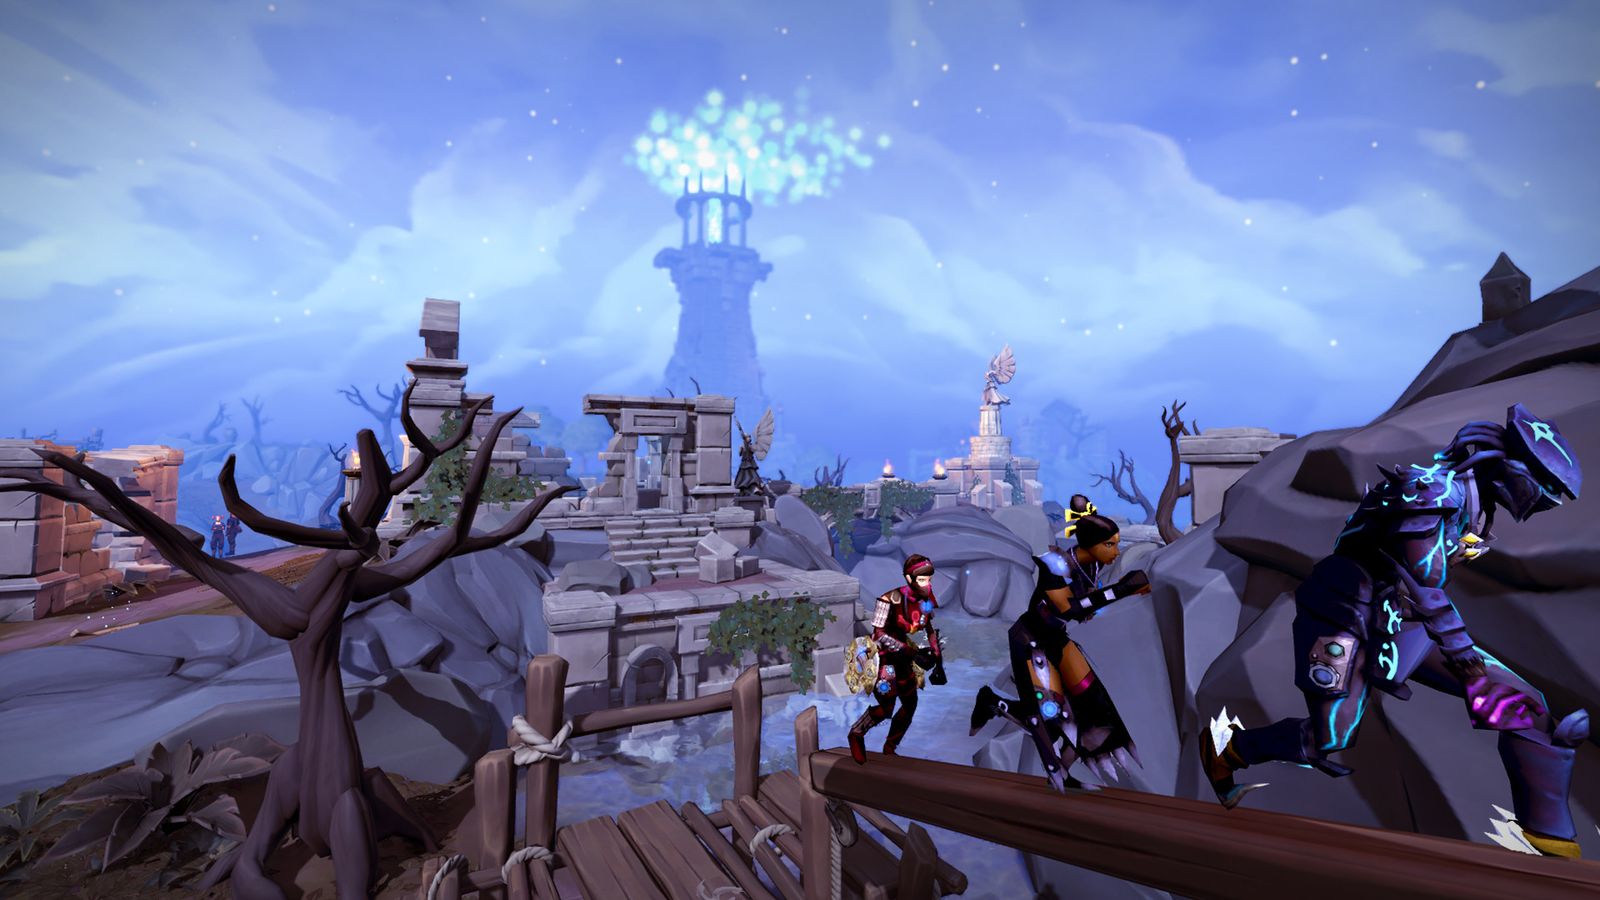 Screenshot from the open world Android game Runscape